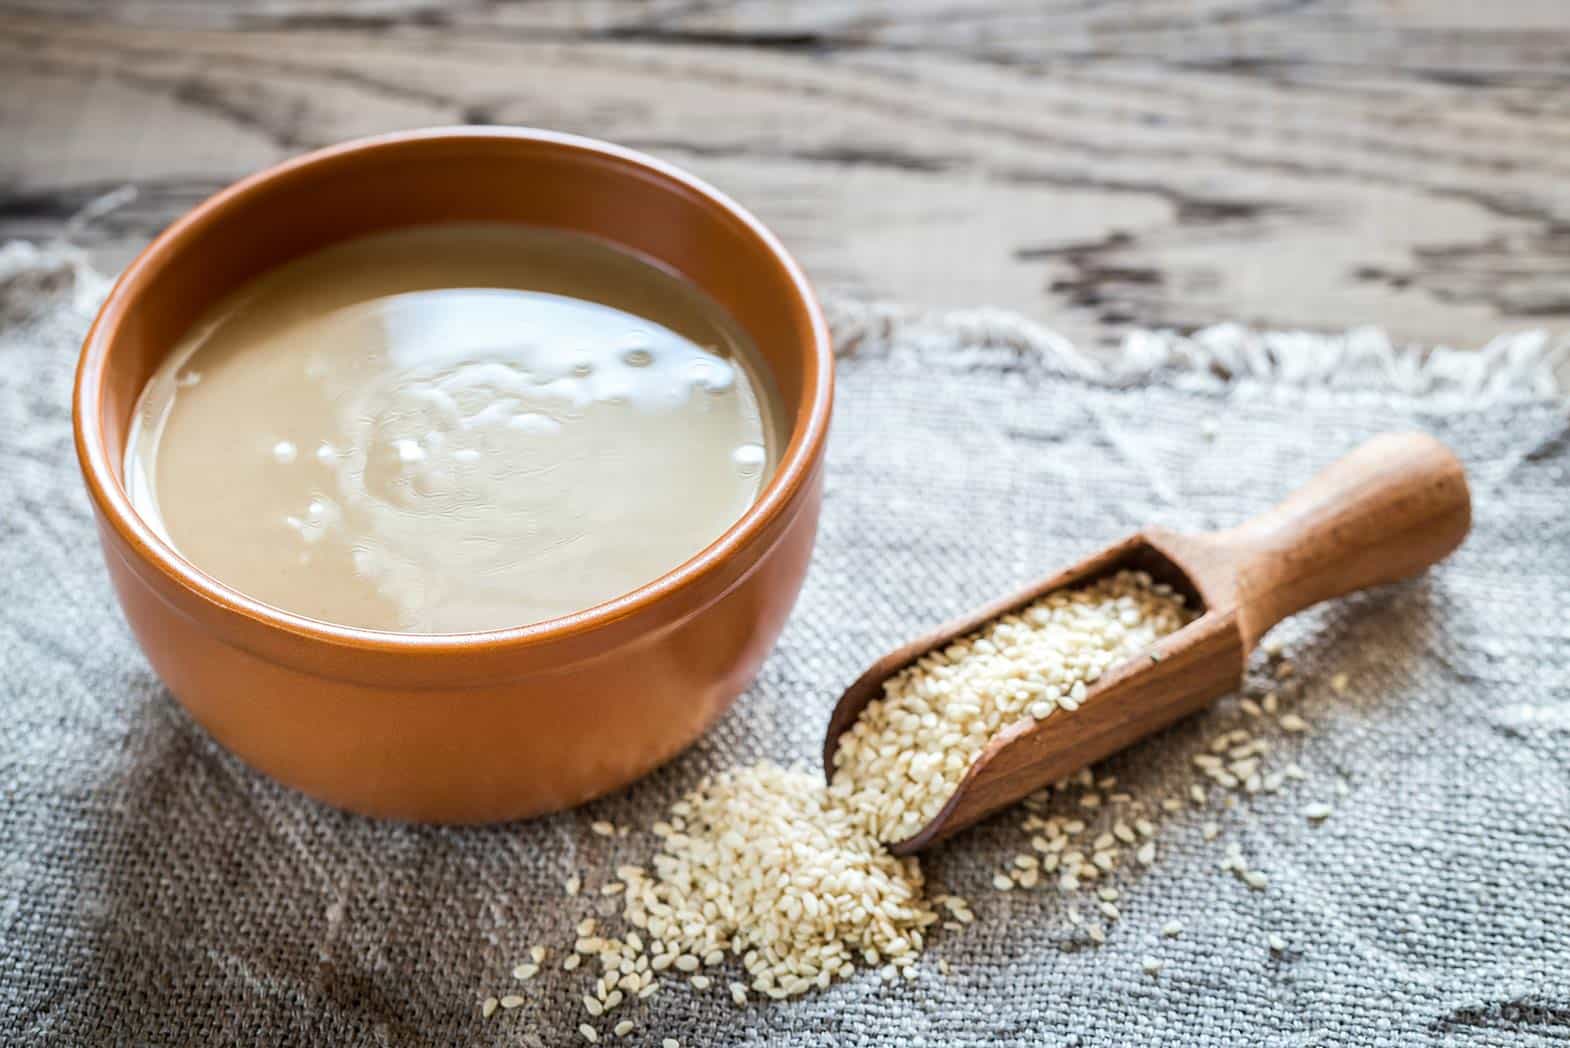 What is tahini and how do you use it?